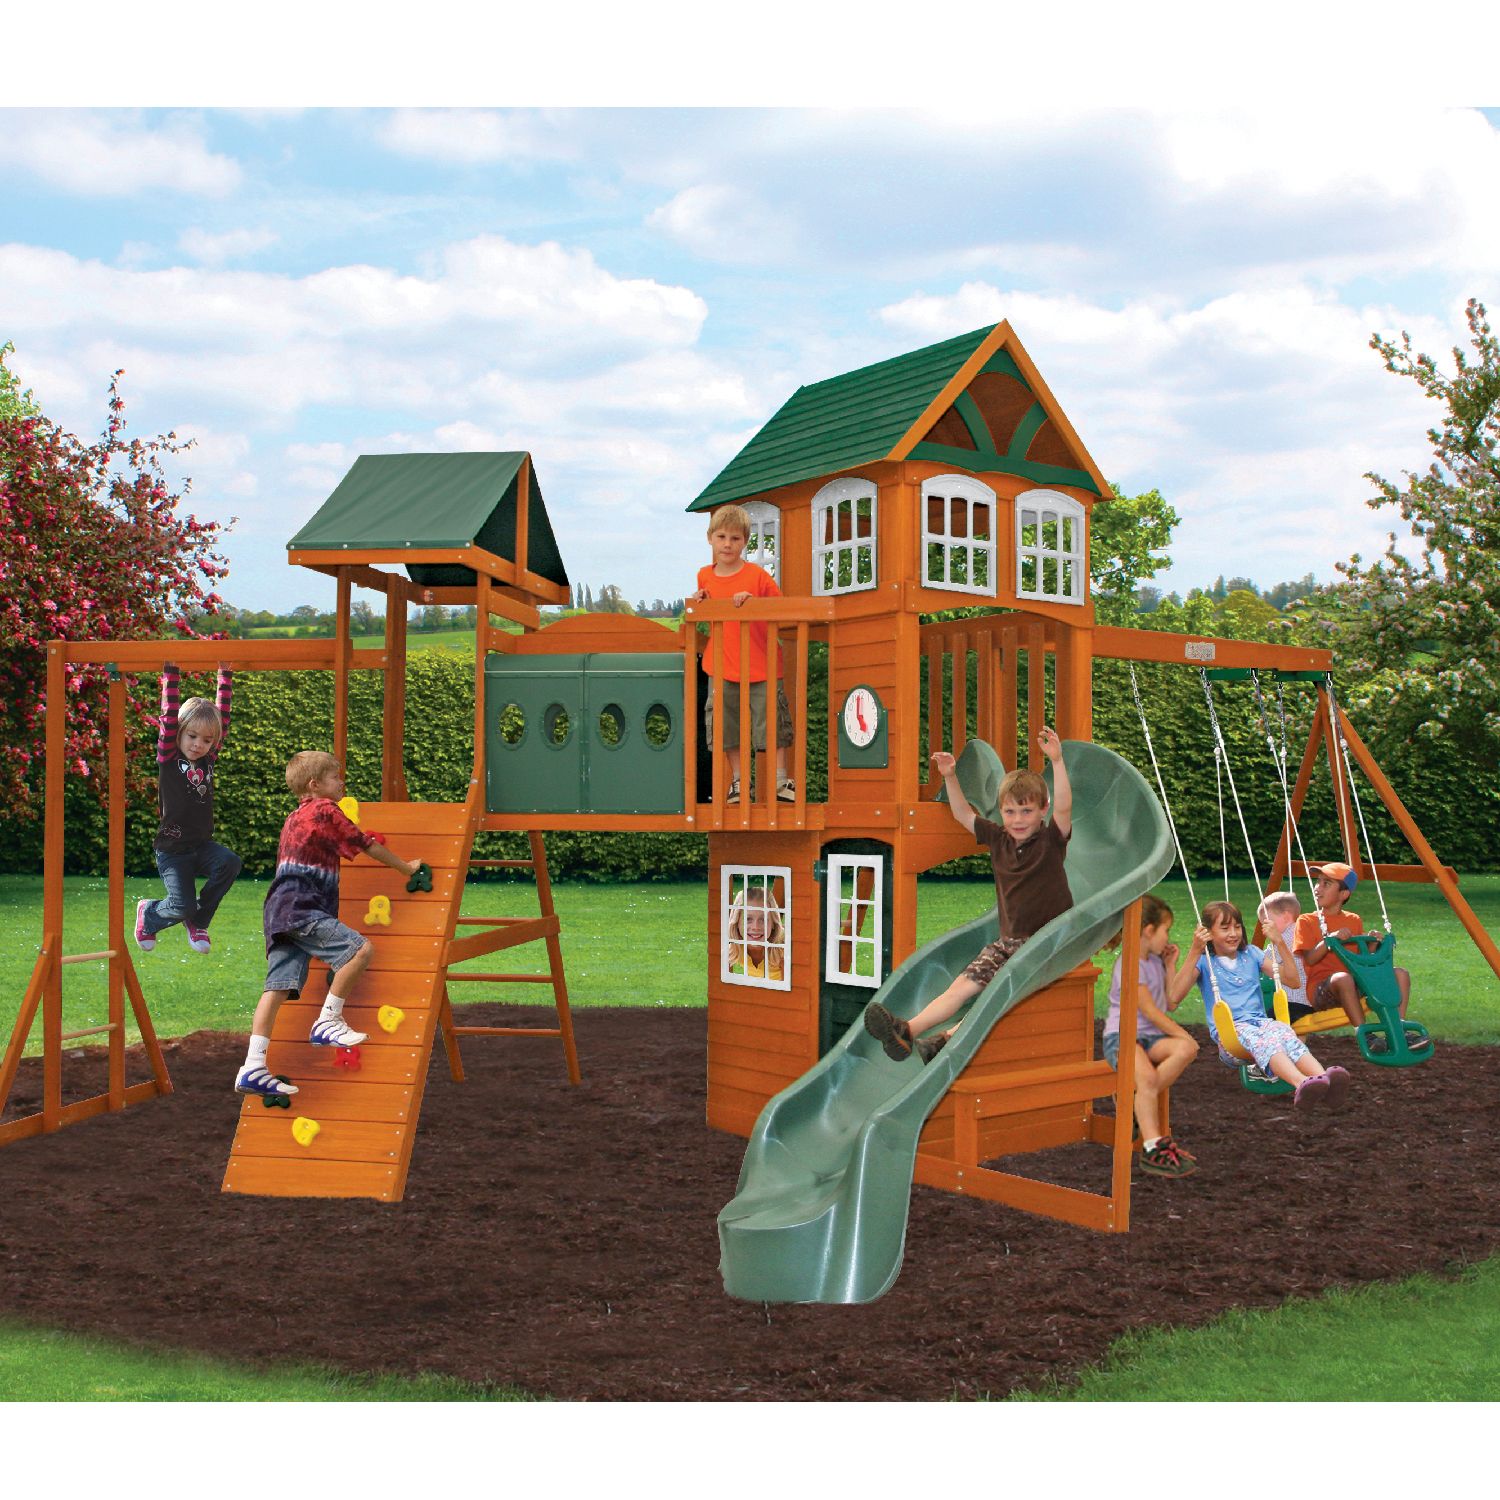 Hillcrest Wooden Play Set by Big Backyard Only $799.00 at Sam's Club ...